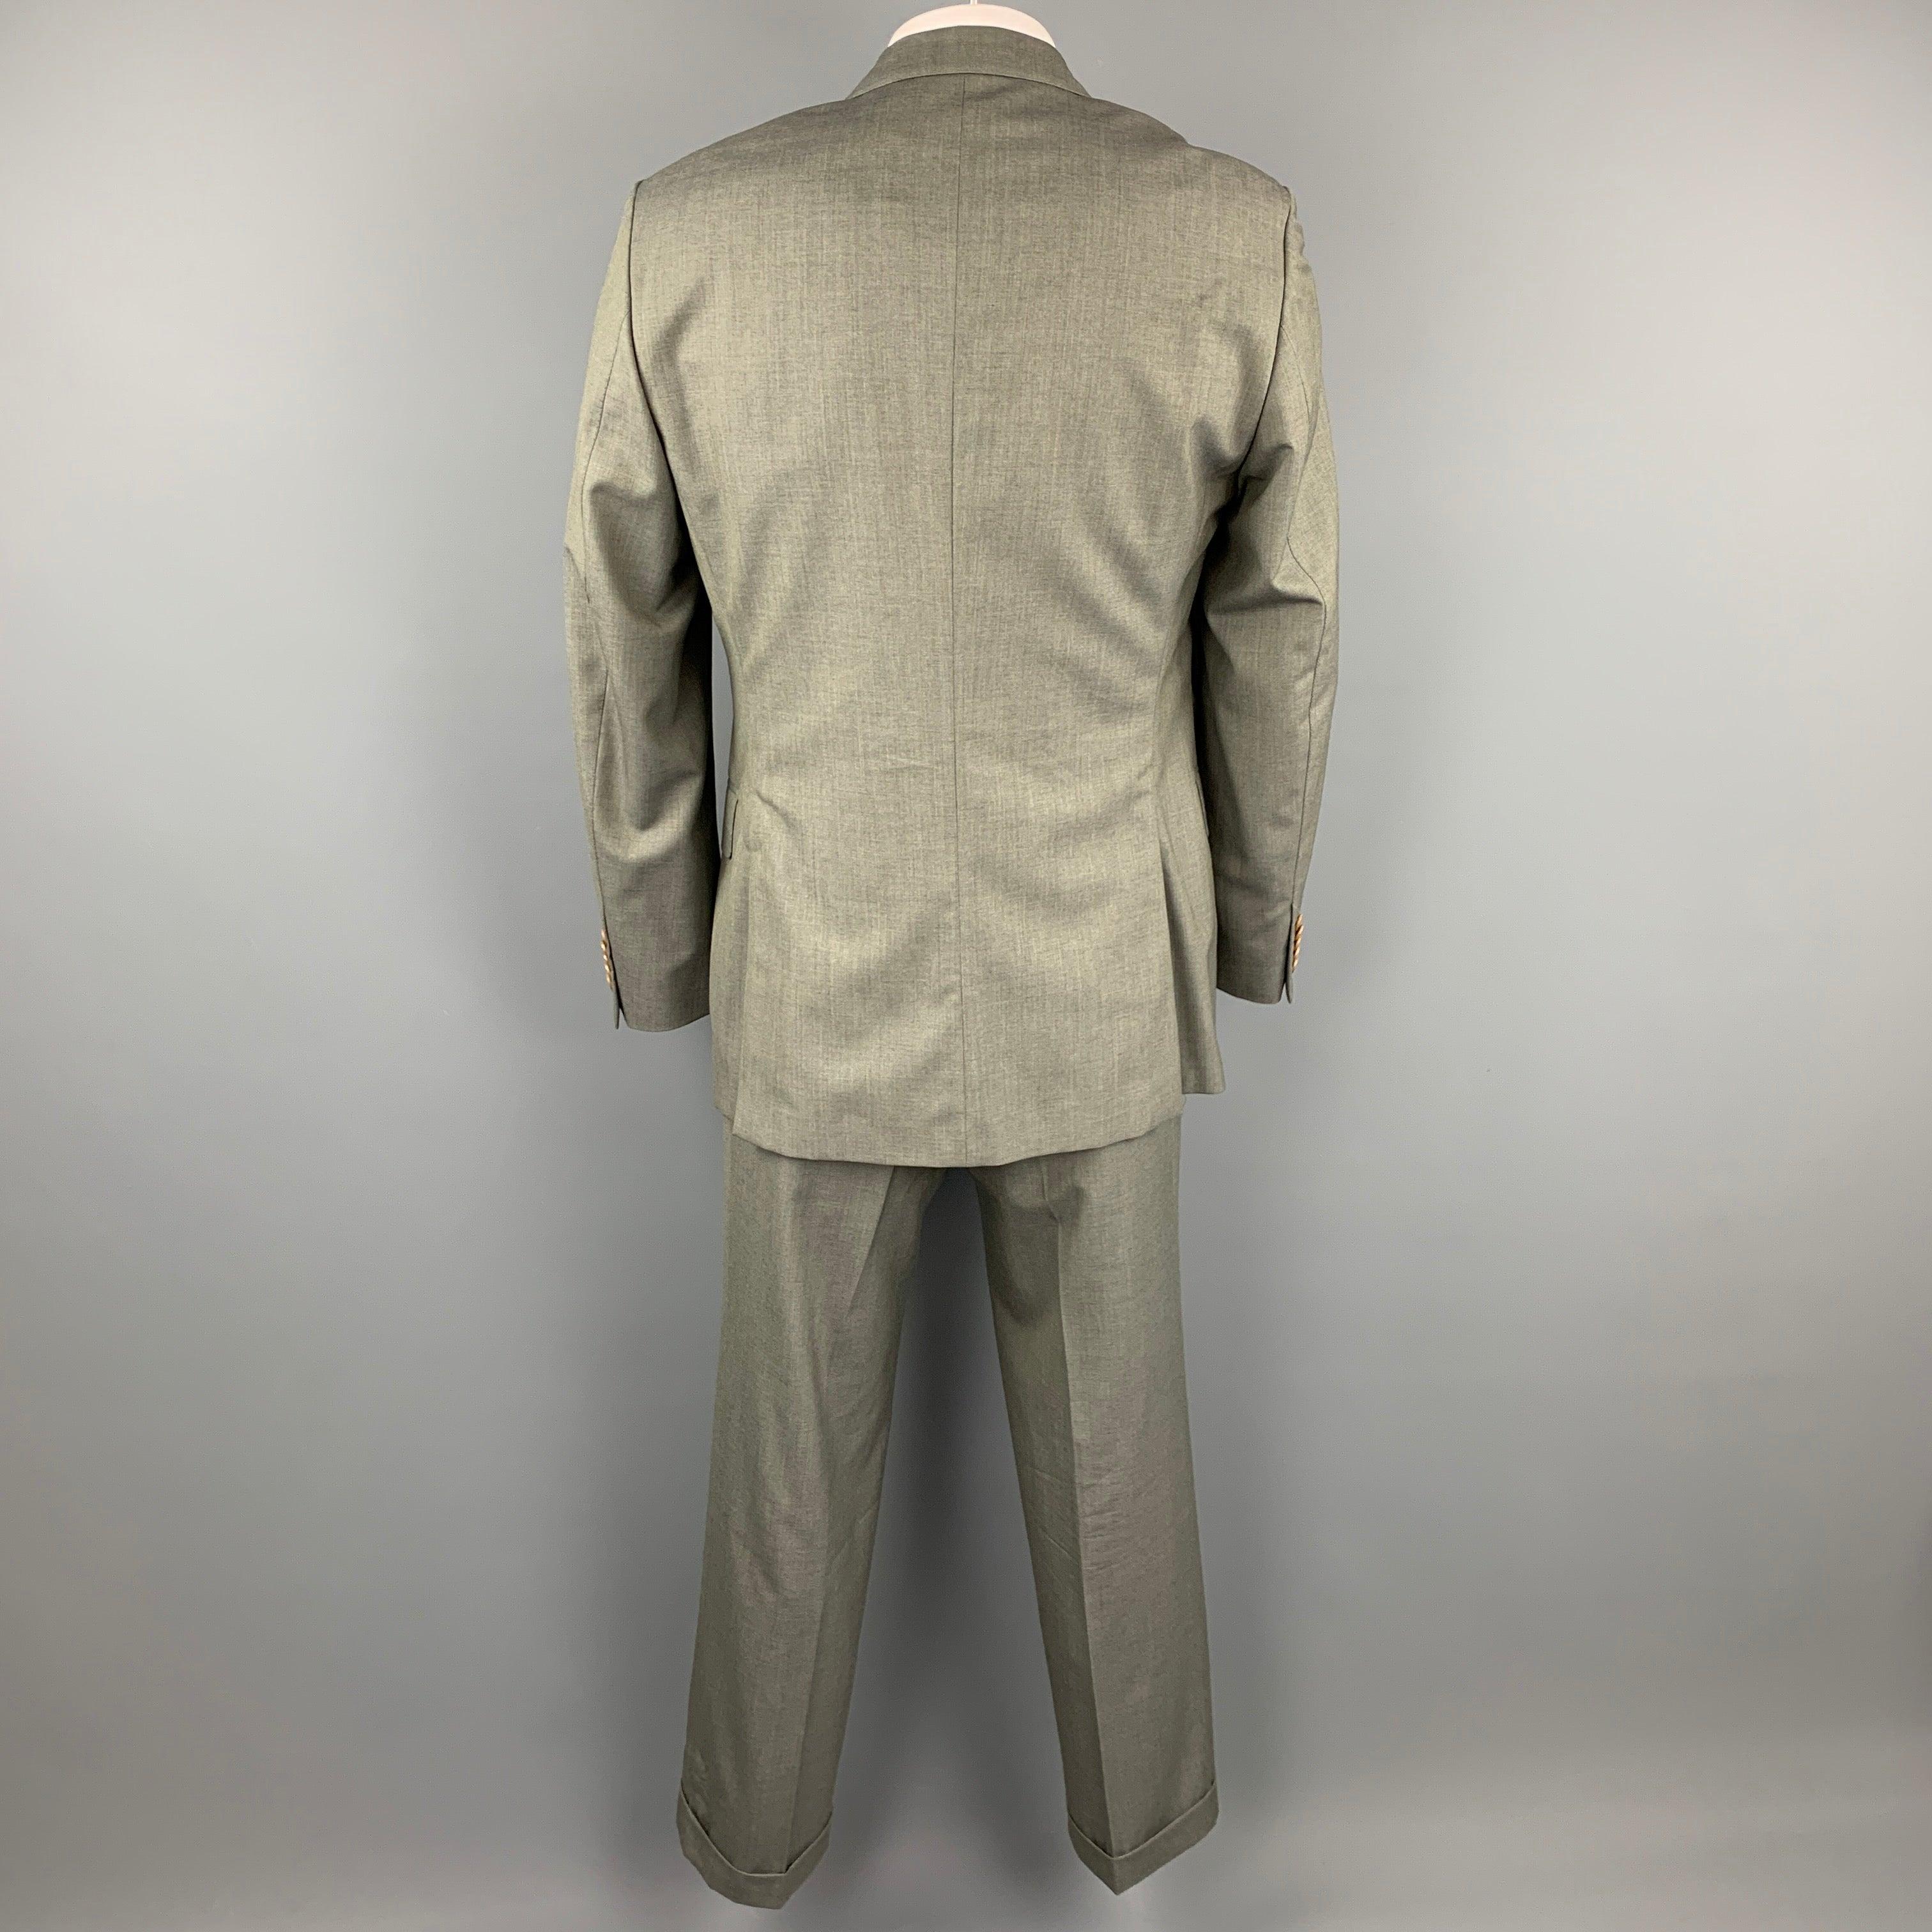 PAUL SMITH The Byard Size 44 Regular Grey Wool Notch Lapel Suit In Excellent Condition For Sale In San Francisco, CA